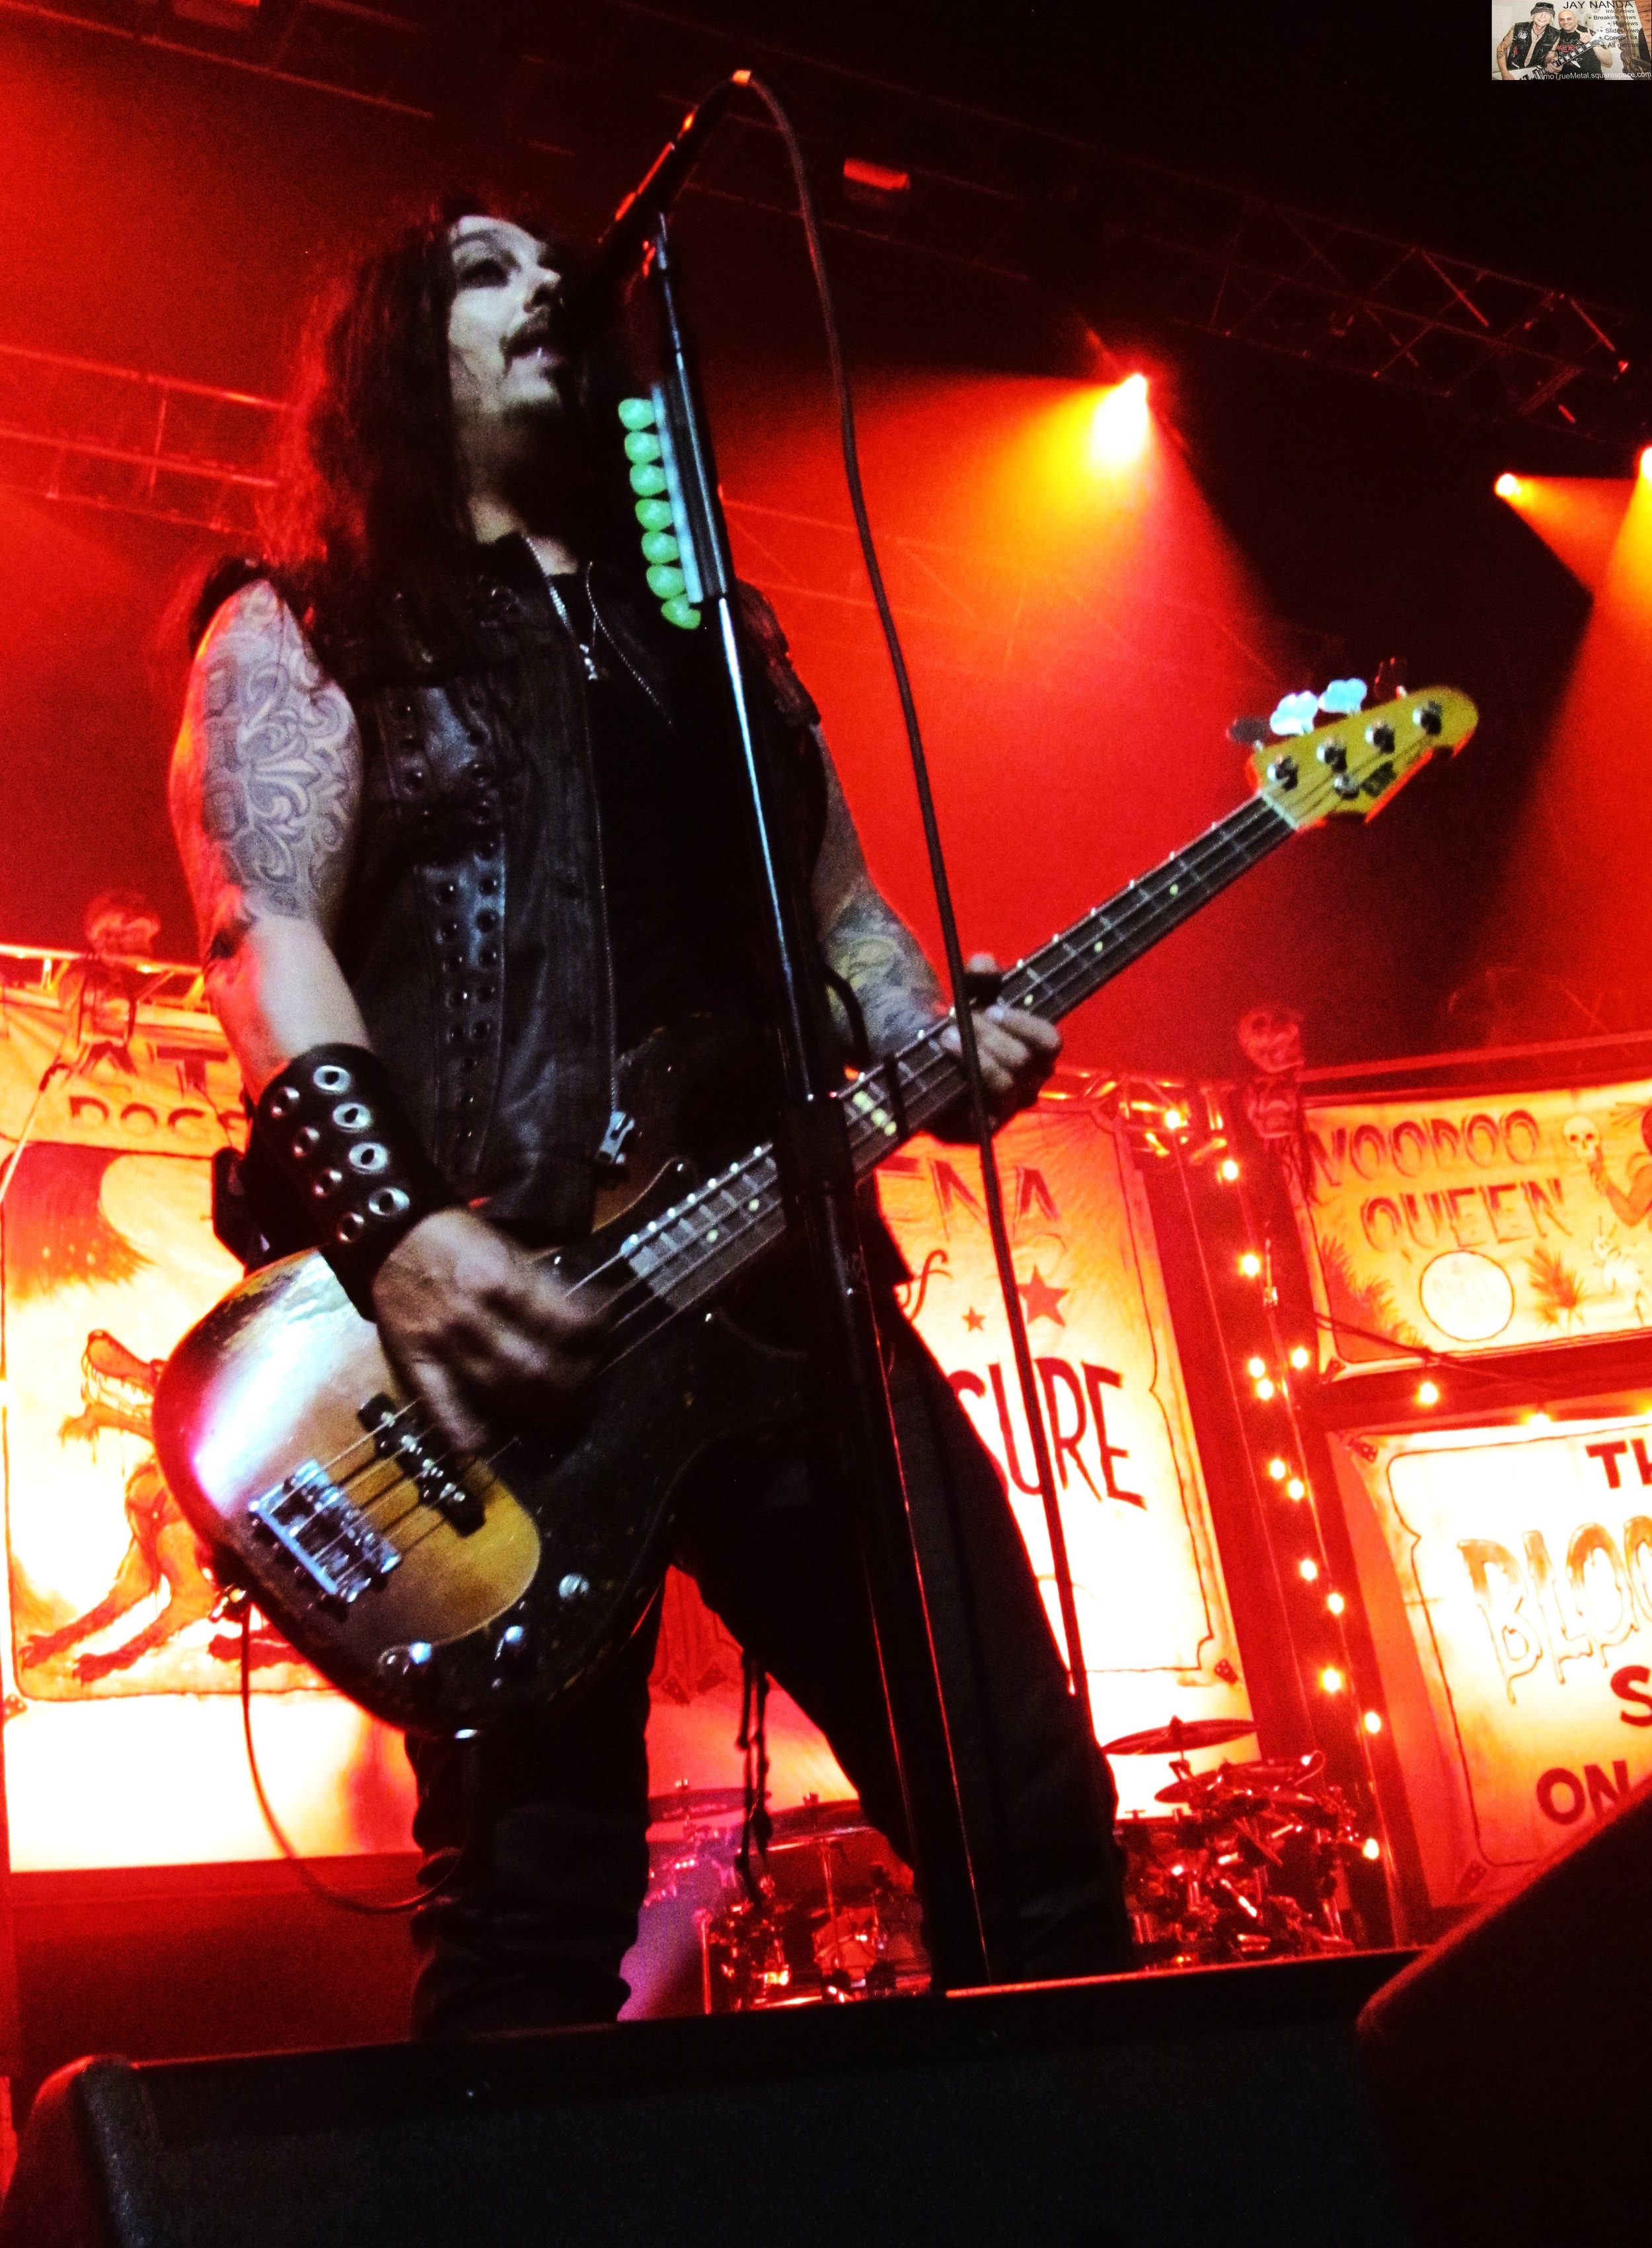  Mike Duda has been playing bass in W.A.S.P. for the past 26 years.  